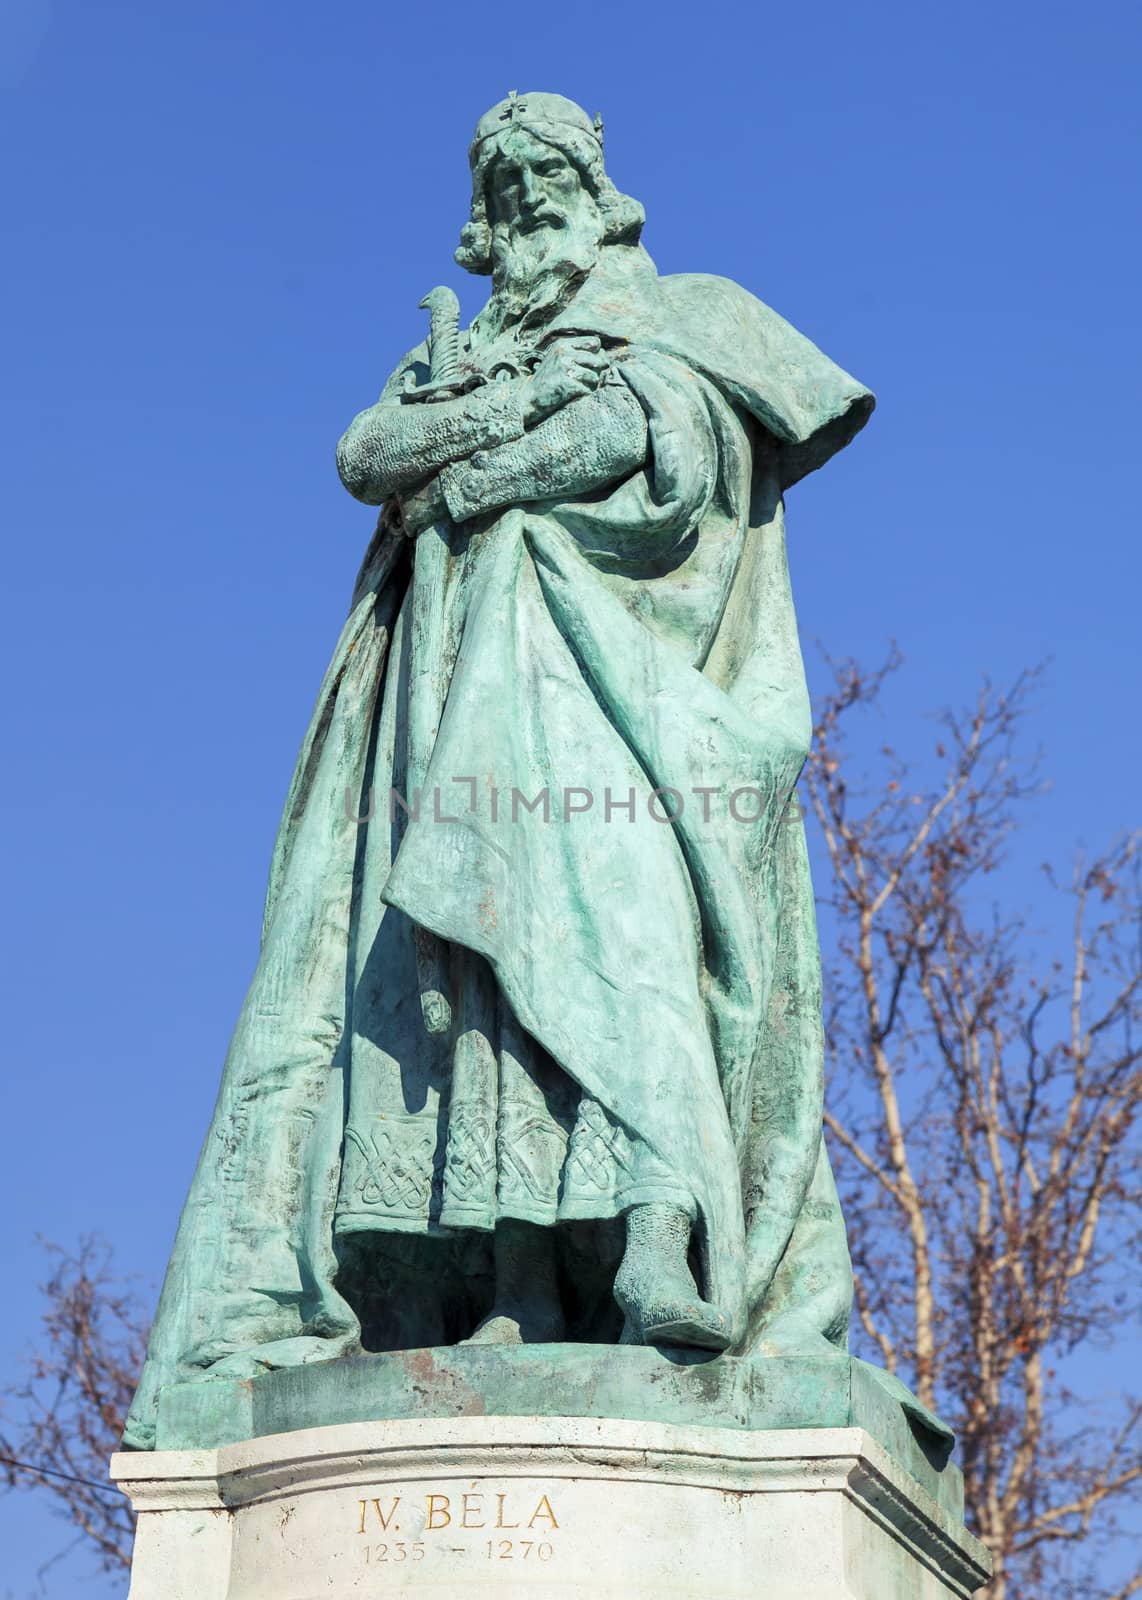 Budapest, HUNGARY - FEBRUARY 15, 2015 - Statue of king Bela IV in Hero's Square, Budapest by Goodday